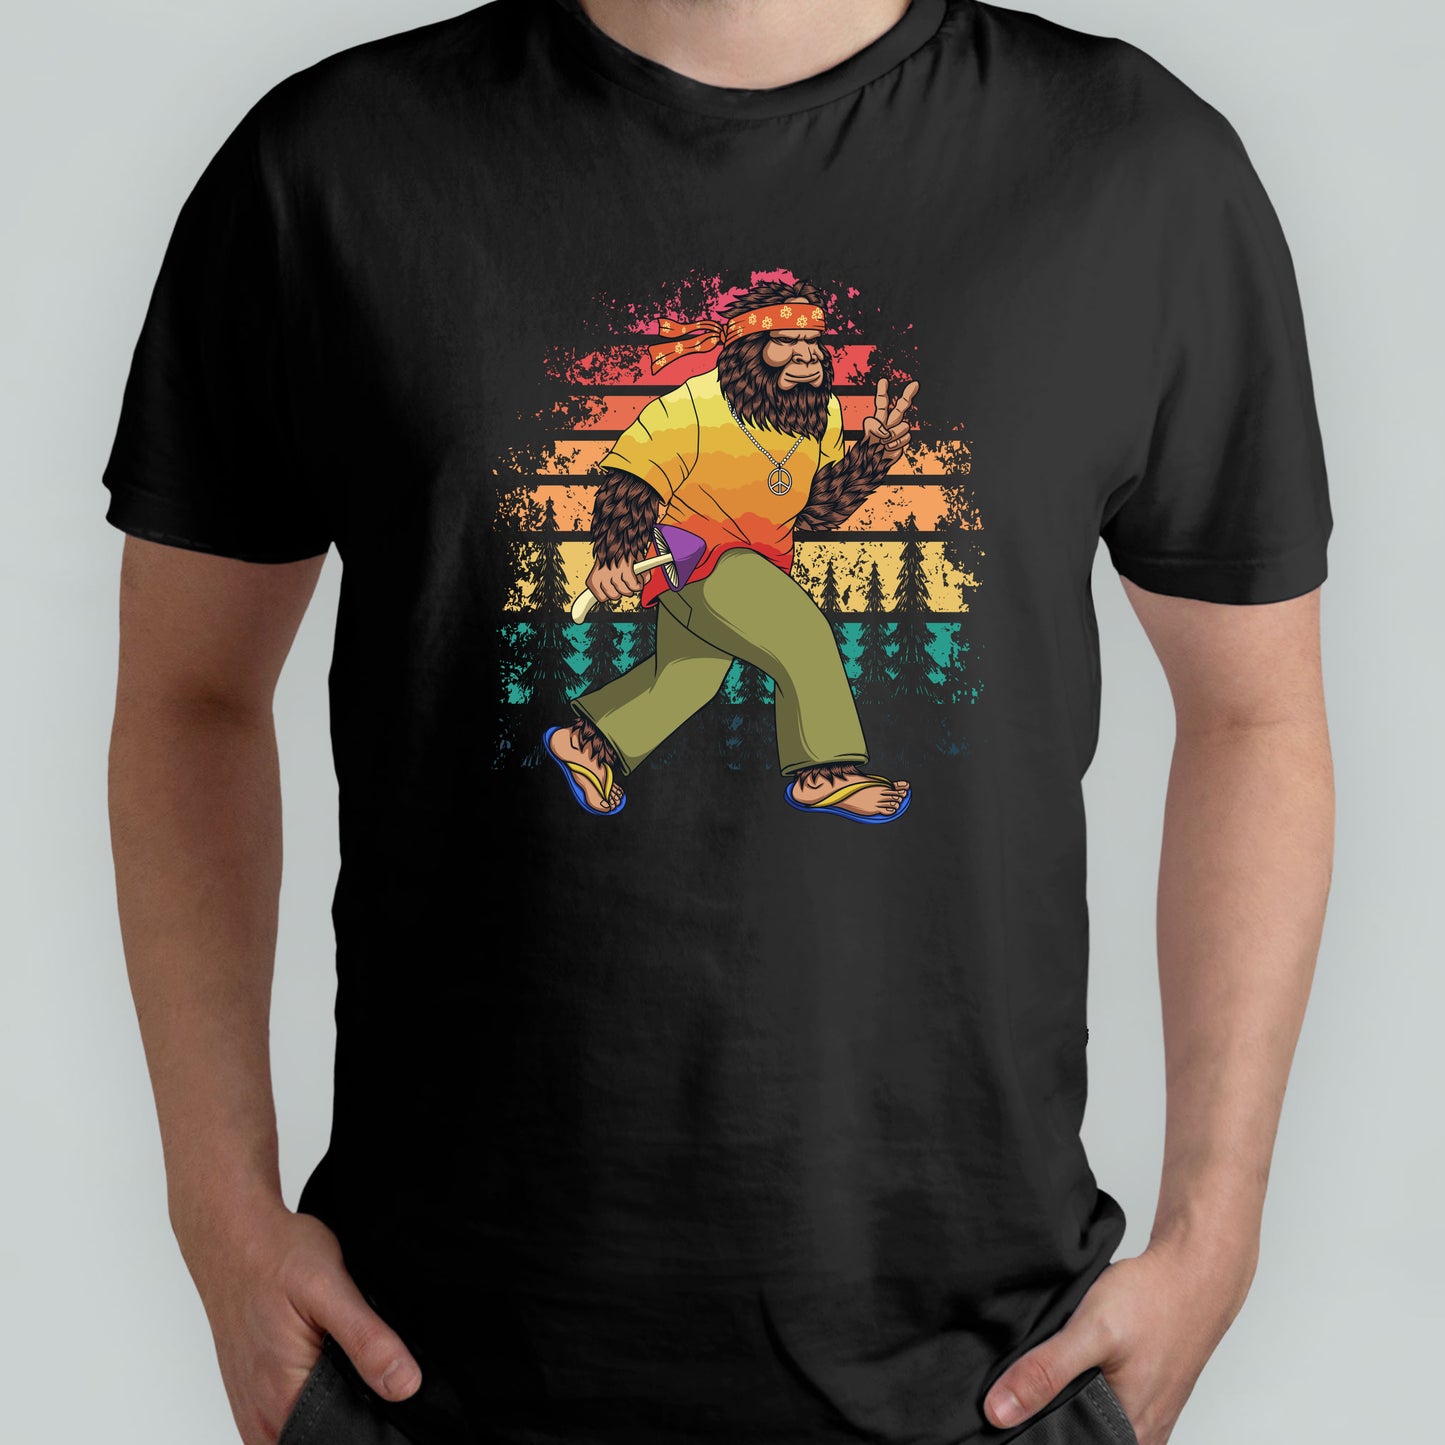 Hippie Bigfoot T-Shirt For Conspiracy Theory T Shirt For Yeti Hippy TShirt For Funny Sasquach Shirt